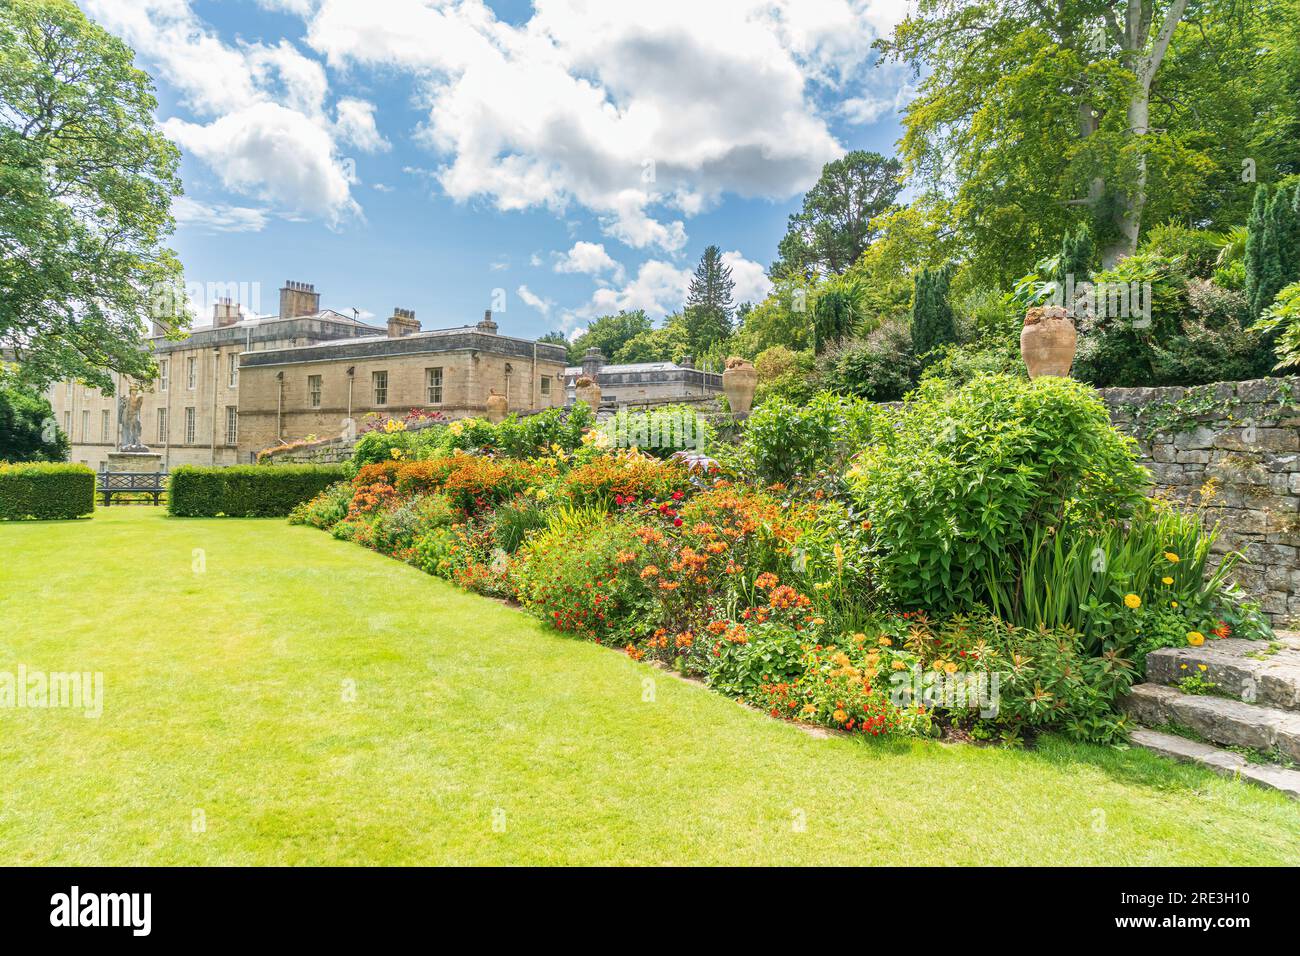 Plas Newydd Country House and Gardens Foto Stock